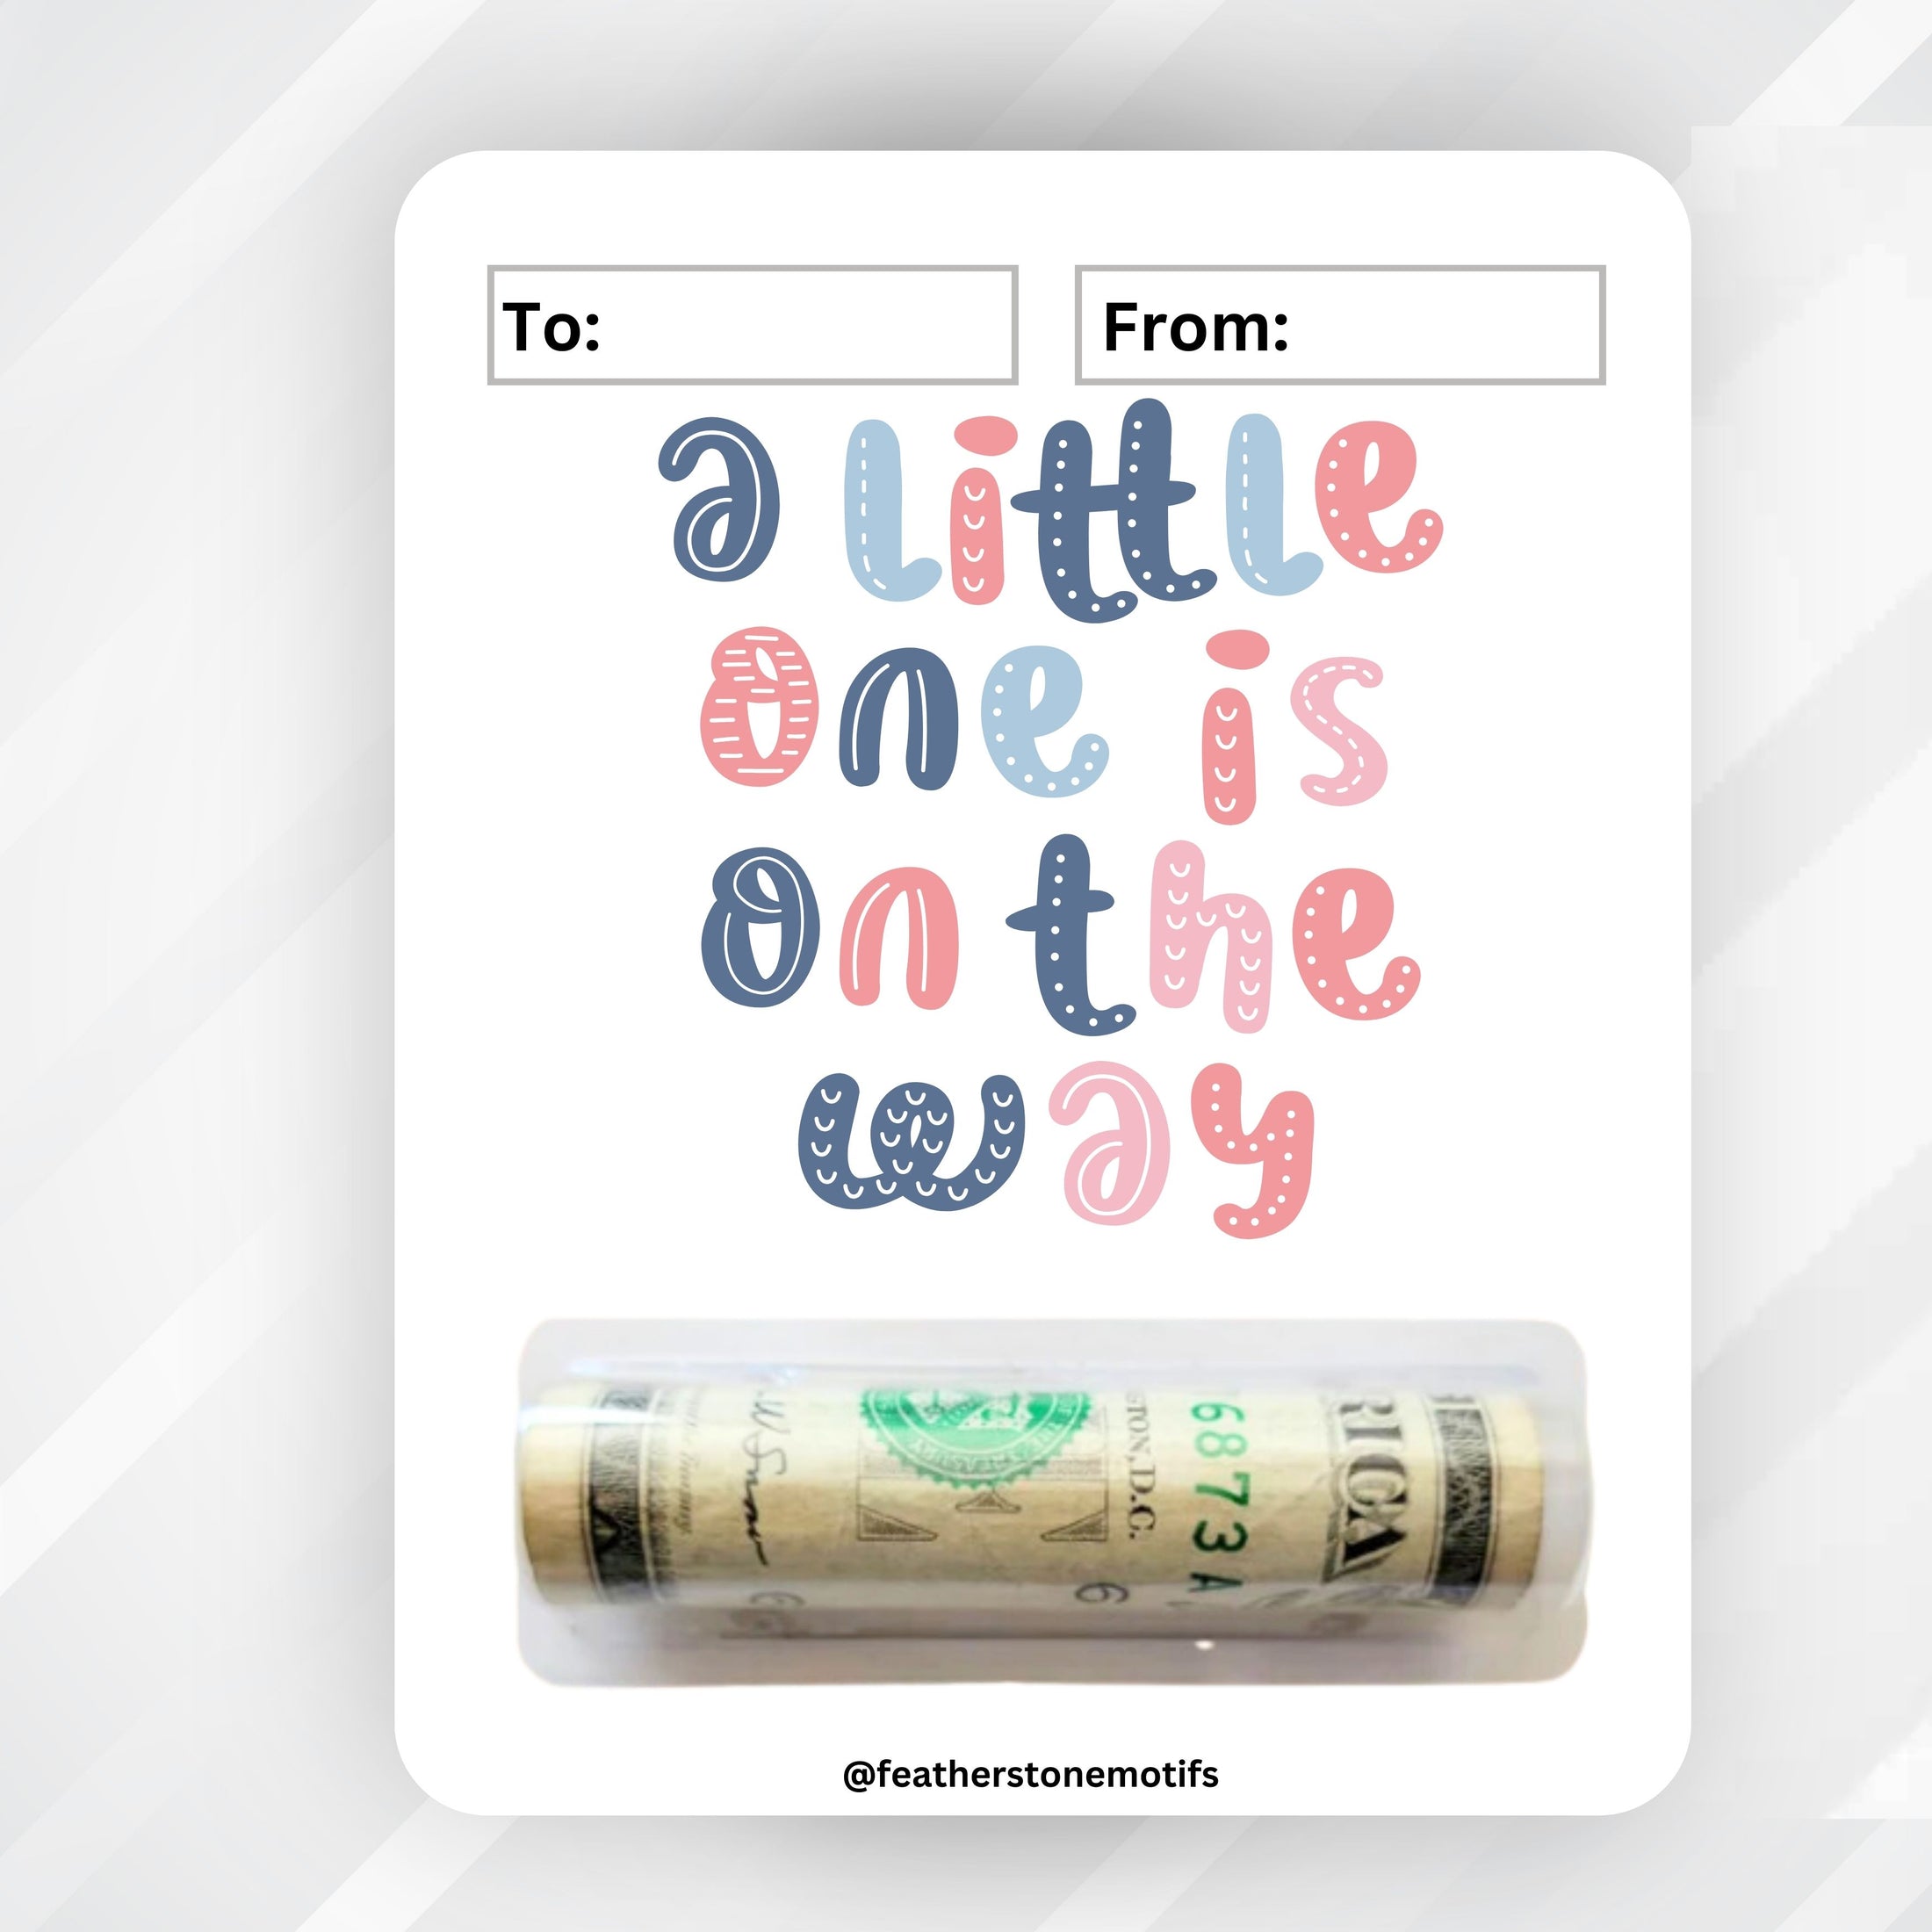 This image shows the money tube attached to the Little one on the way Money Card.